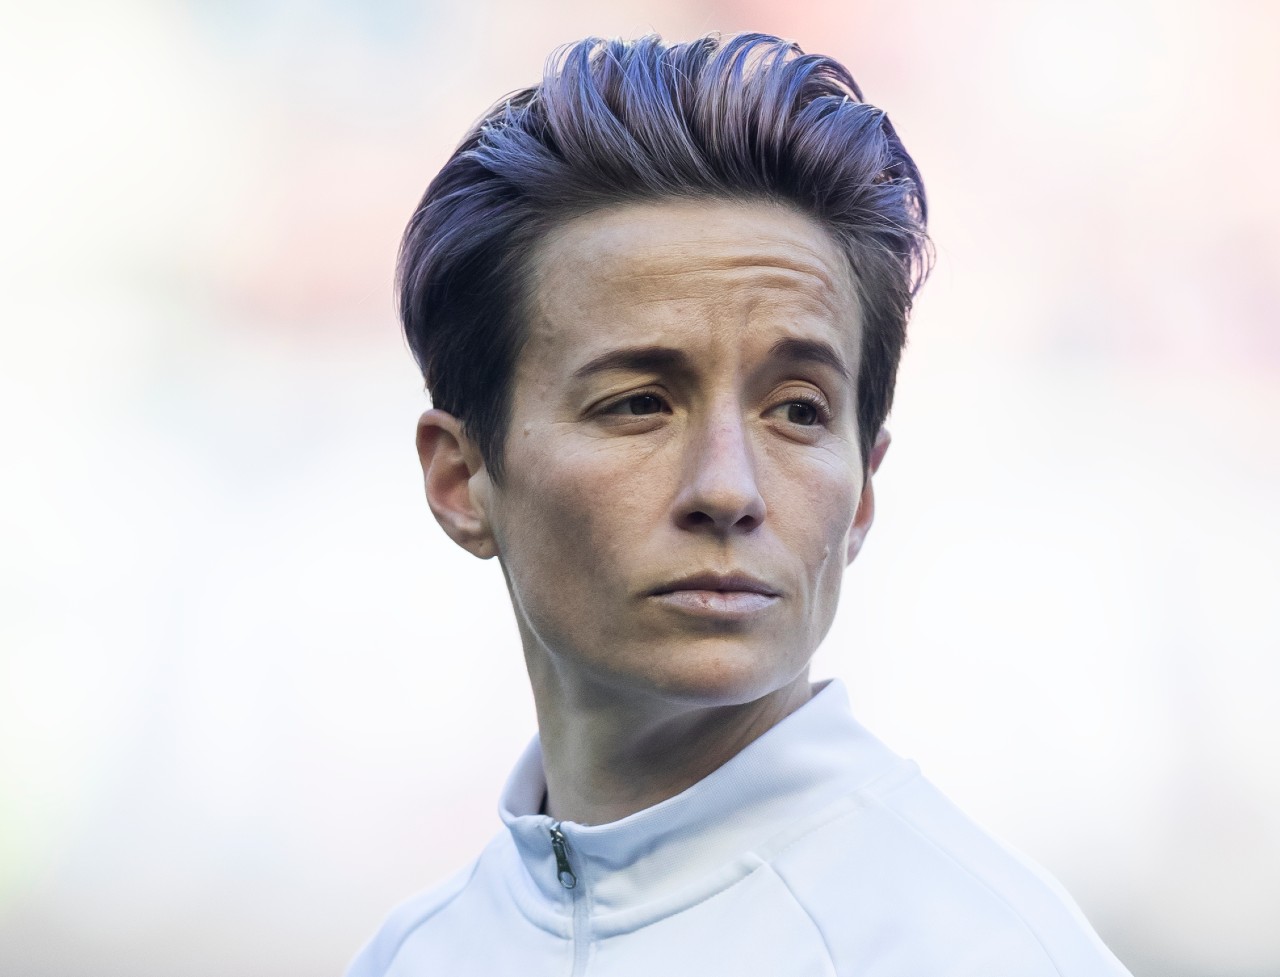 megan-rapinoe-on-deadly-capitol-attack:-‘this-was-about-holding-up-white-supremacy’